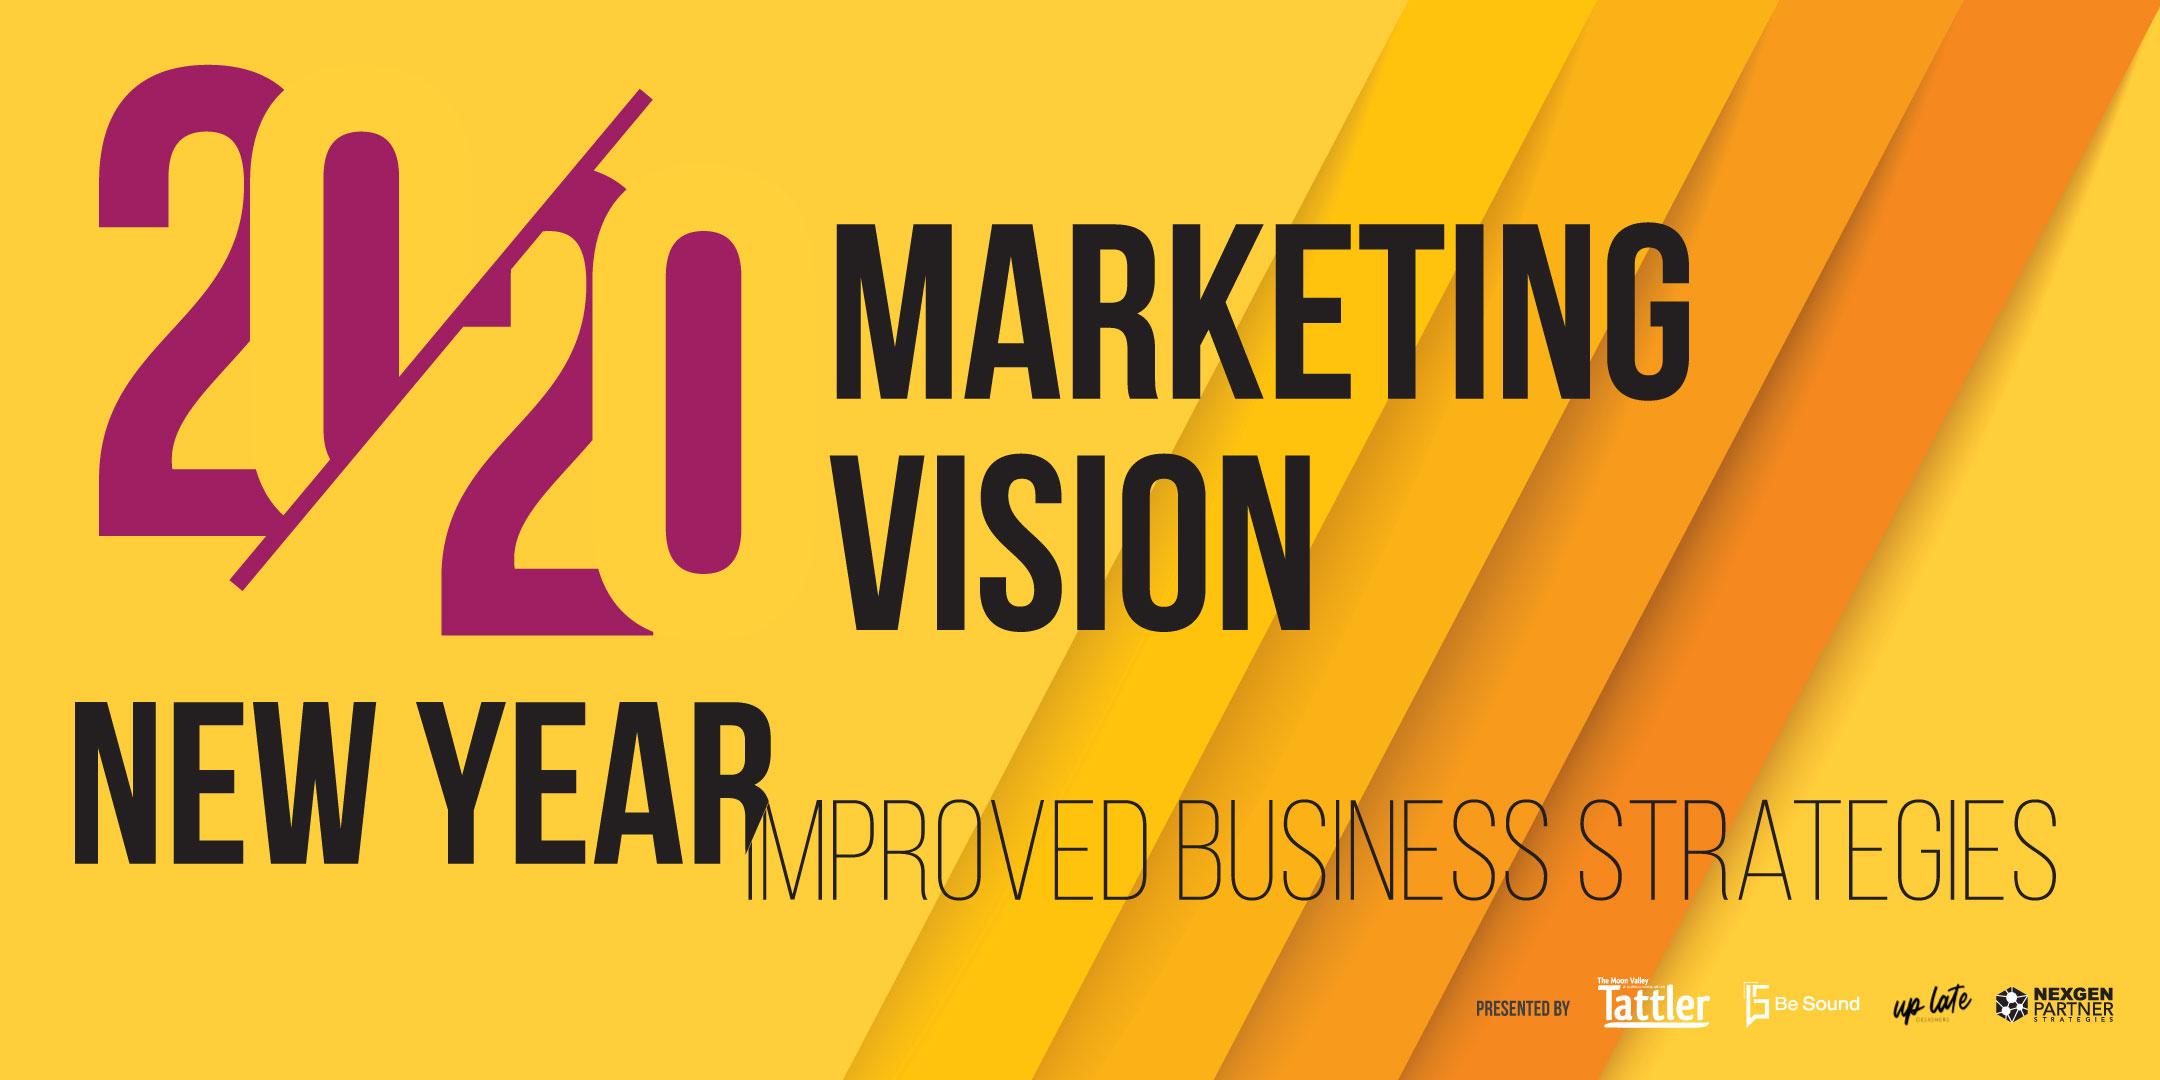 2020 Marketing Vision: New Year, Improved Business Strategies